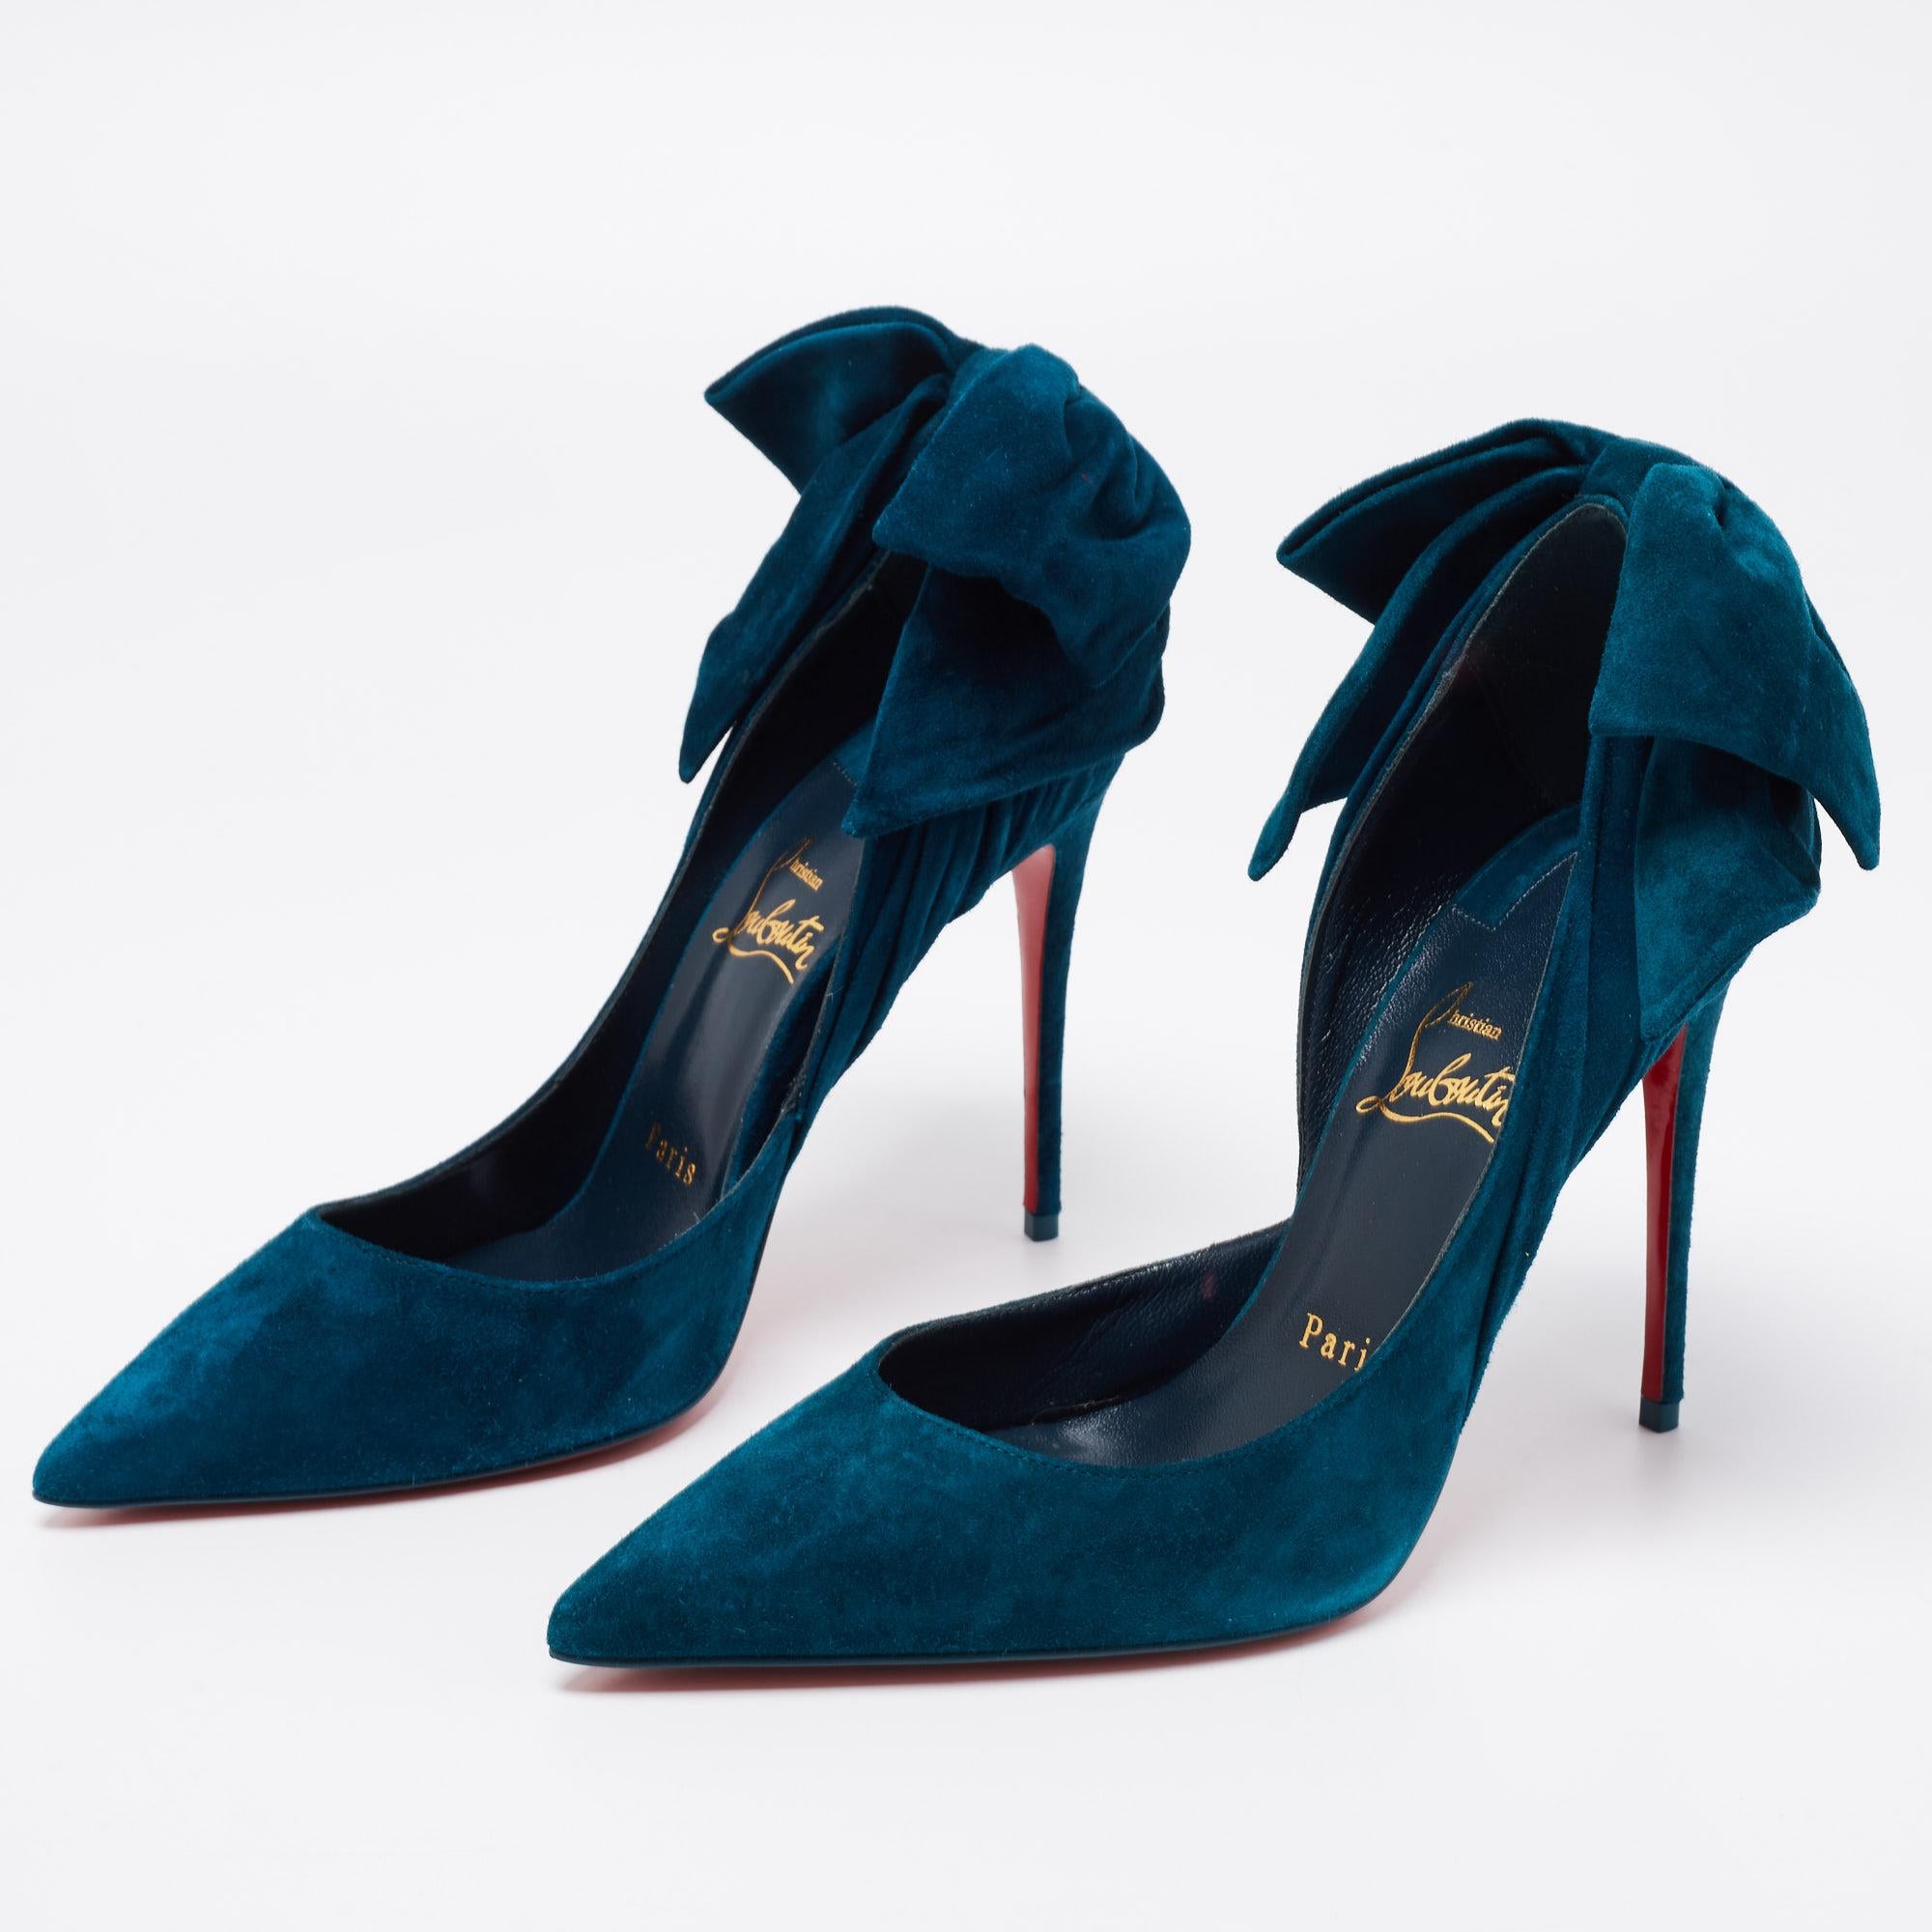 Women's Christian Louboutin Teal Blue Suede Bow Rabakate D'Orsay Pumps Size 37